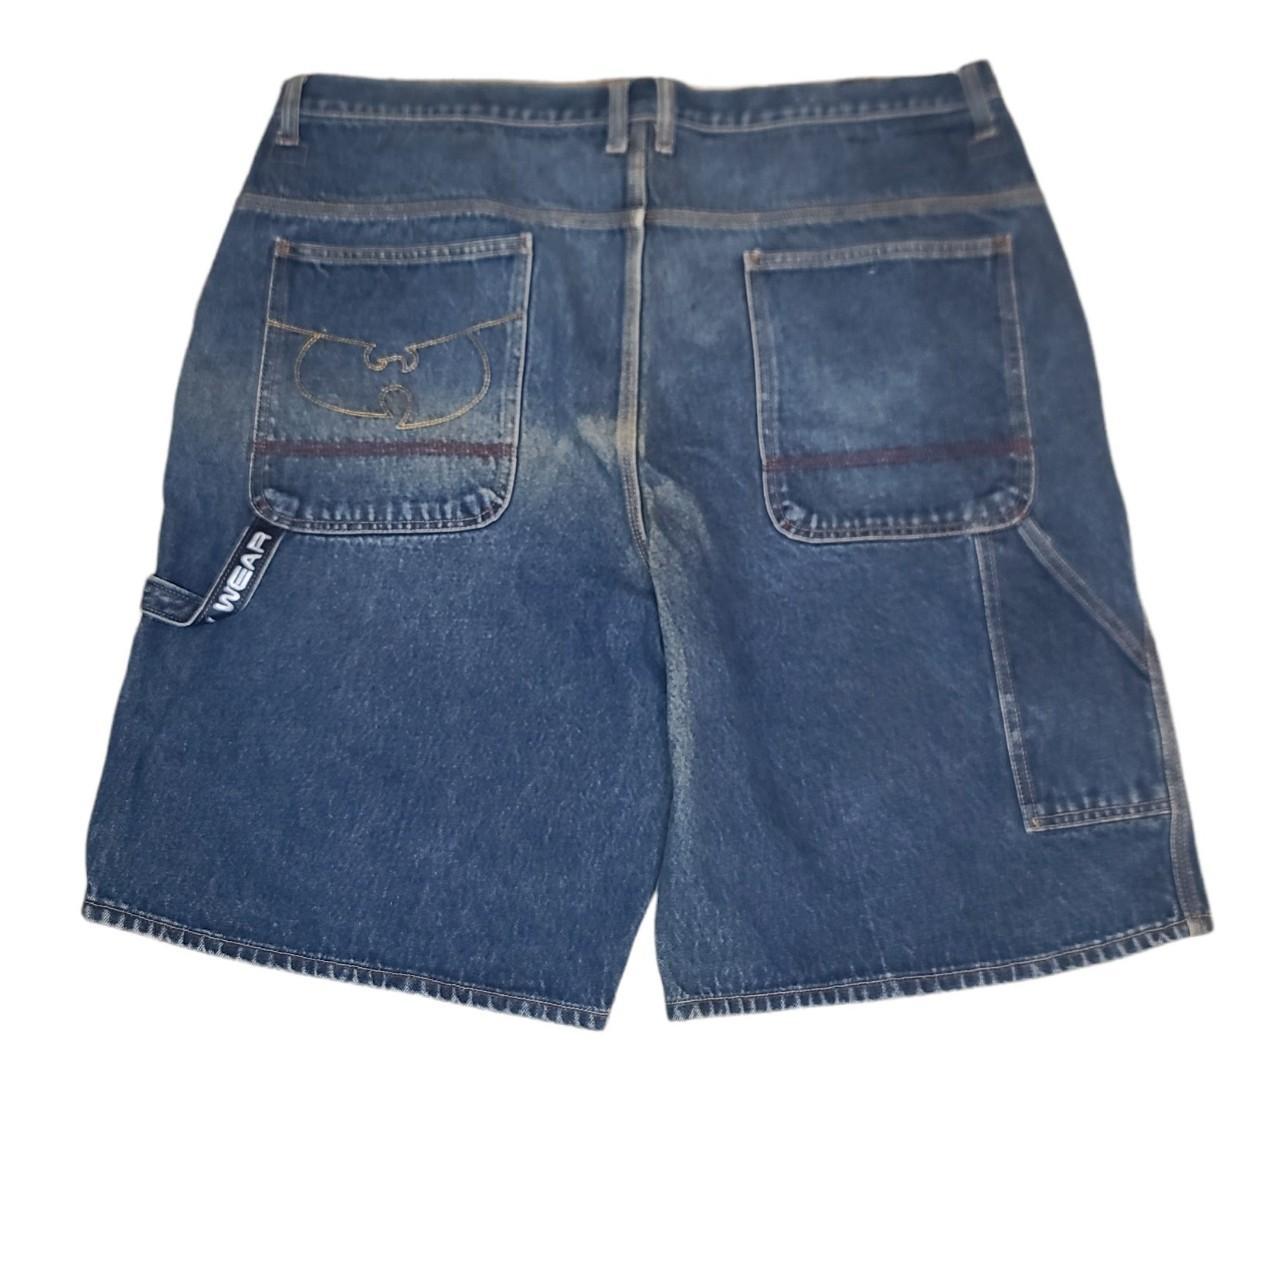 Wu Wear Men's Navy and Blue Shorts (2)